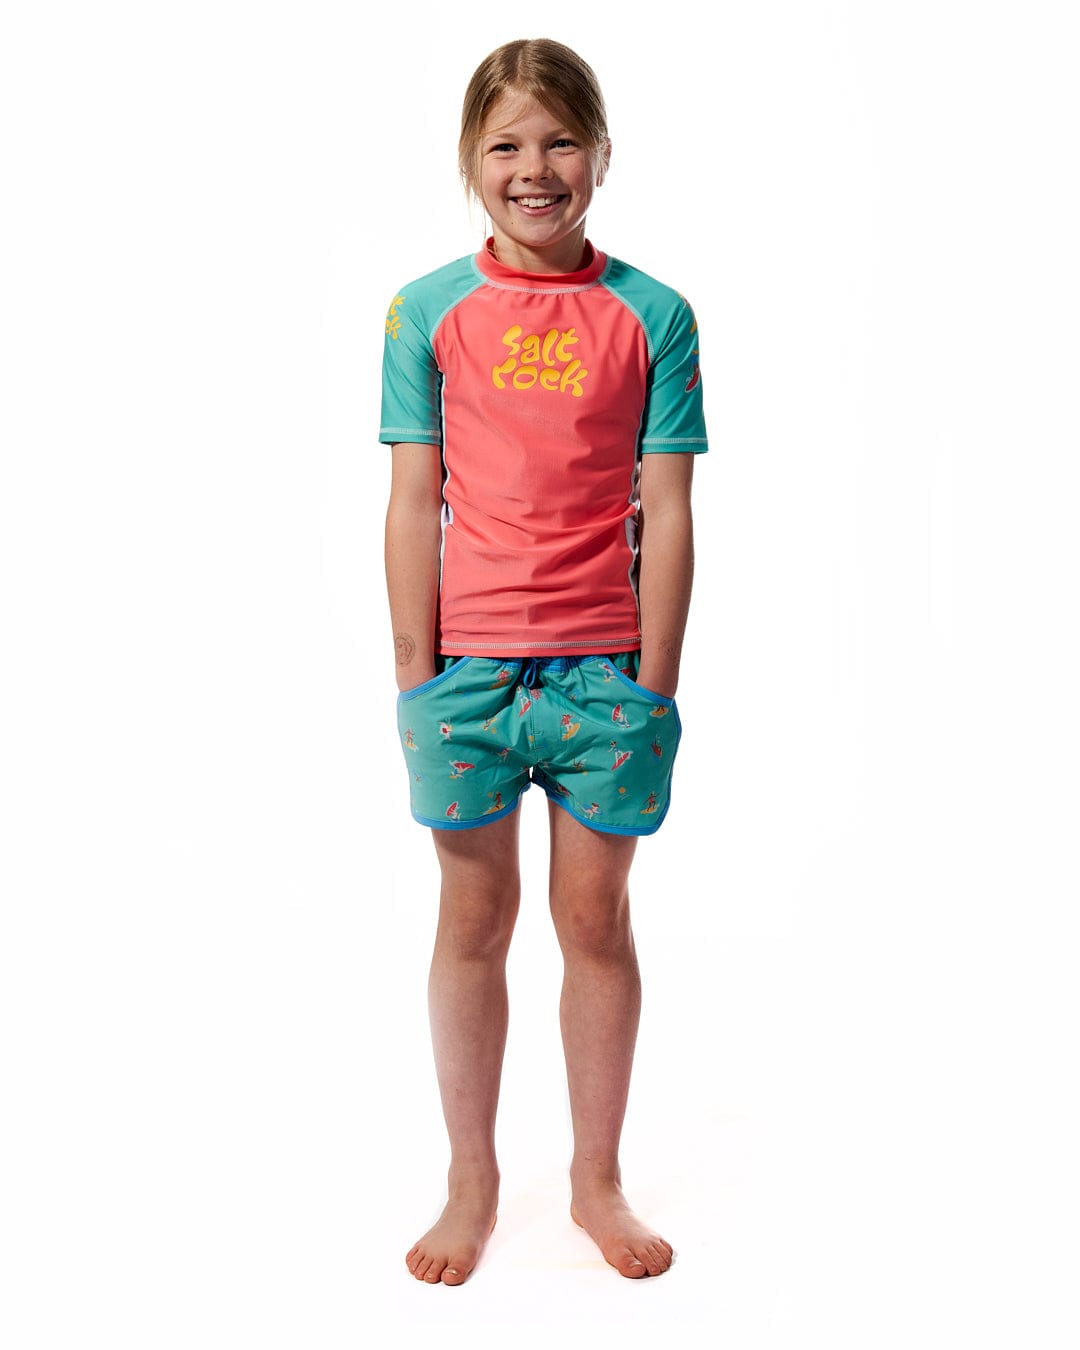 A young girl wearing a Saltrock Surf Sister - Kids Short Sleeve Rashvest in Coral/Turquoise and shorts.